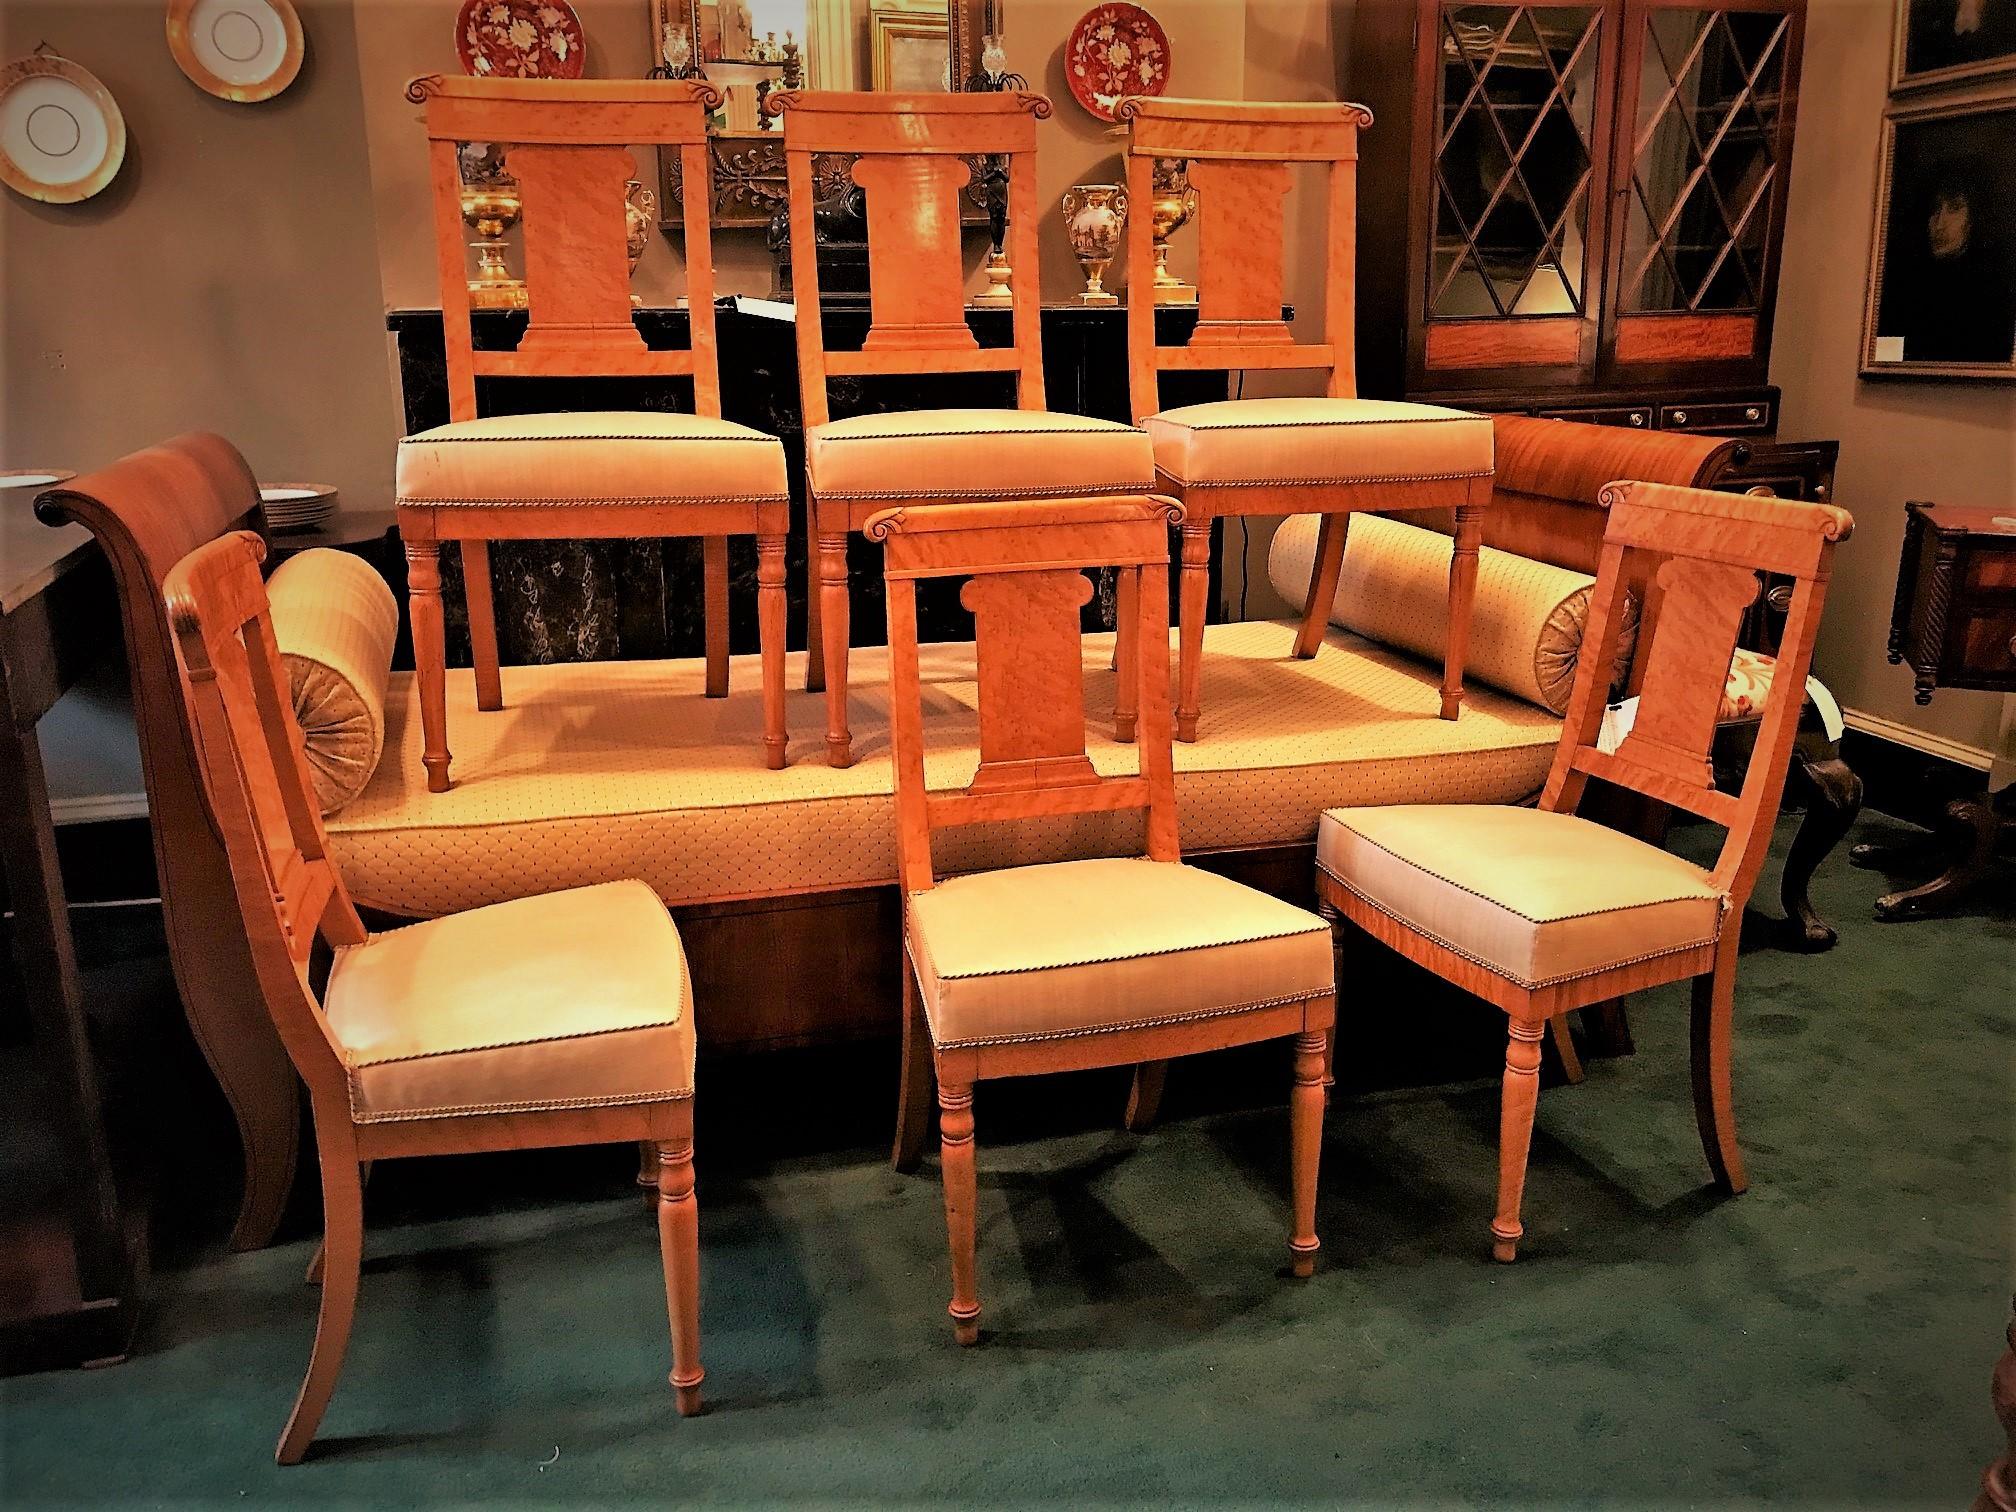 Set of 6 Neo-Classic Birdseye Maple Chairs, Brussels, Circa: 1825 For Sale 5